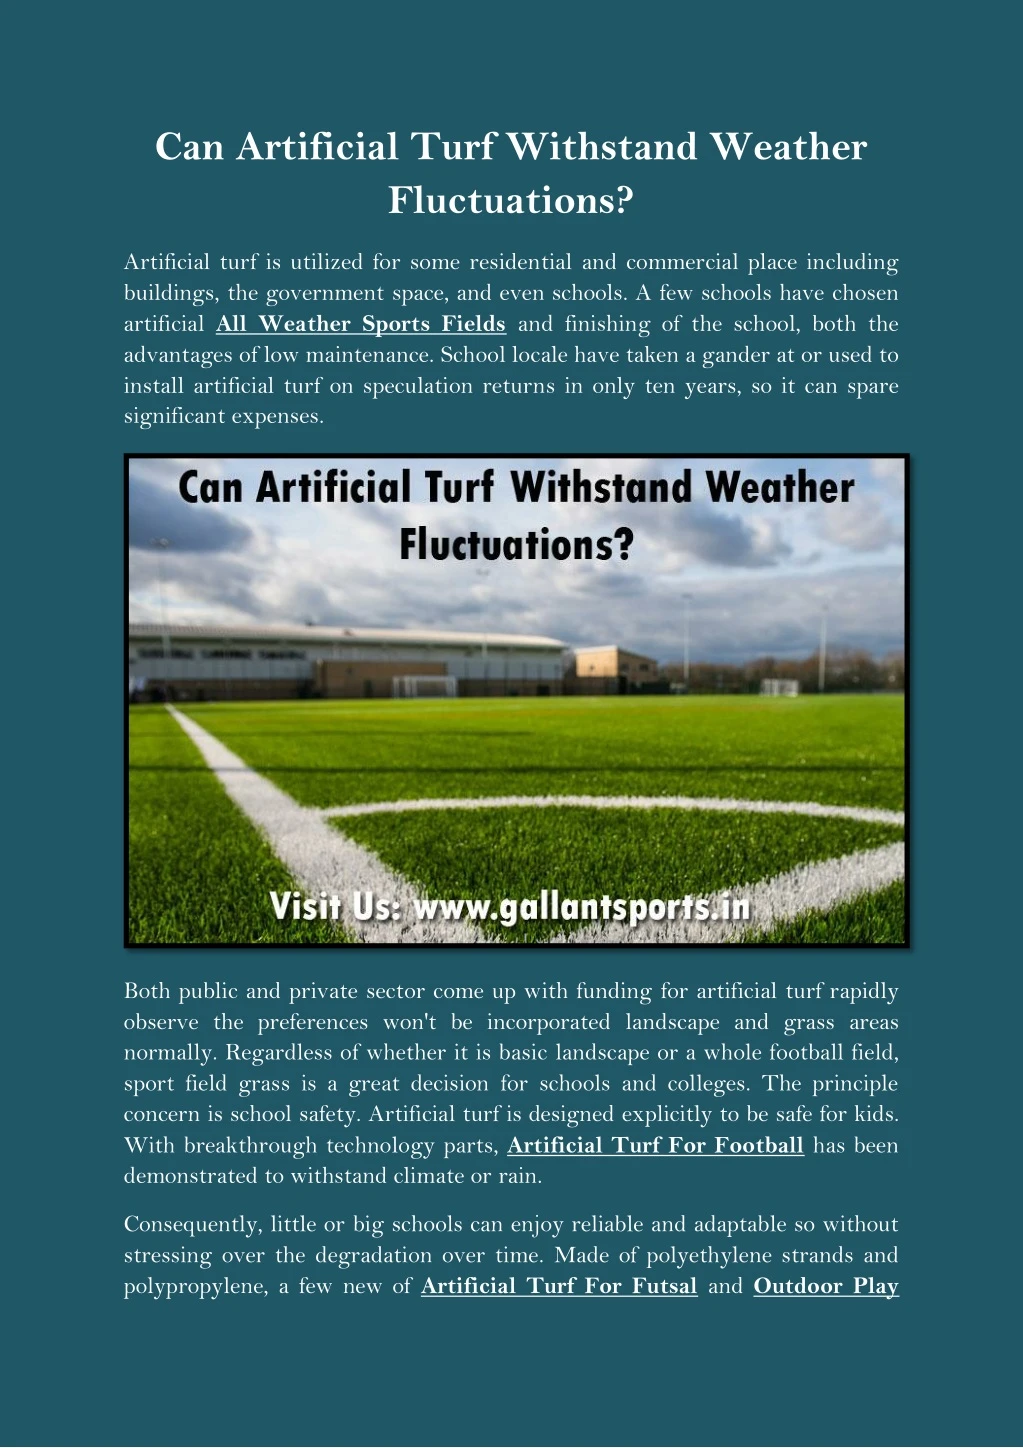 can artificial turf withstand weather fluctuations